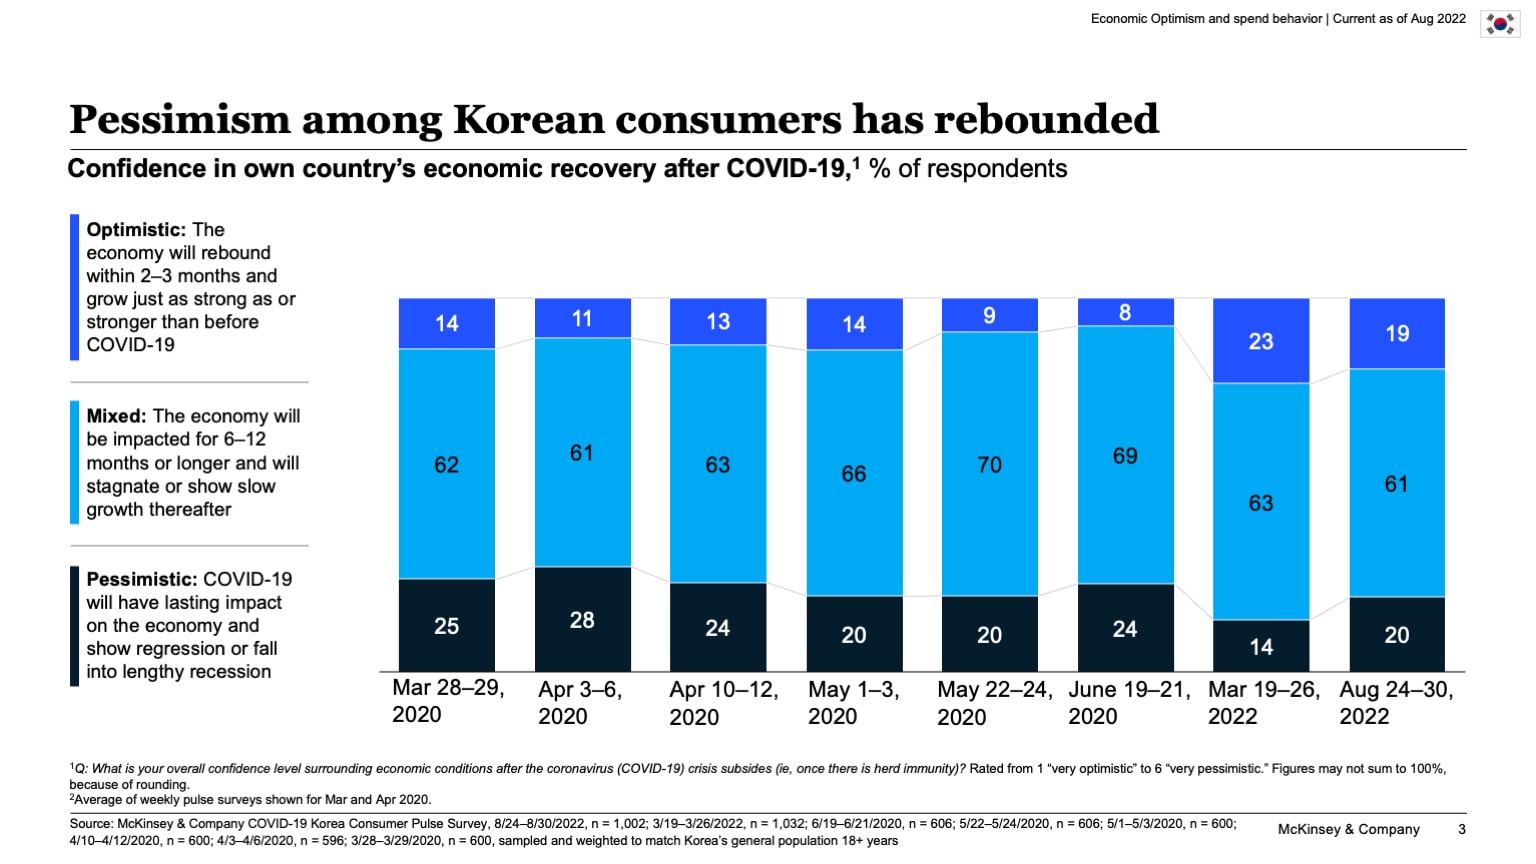 Pessimism among Korean consumers has rebounded